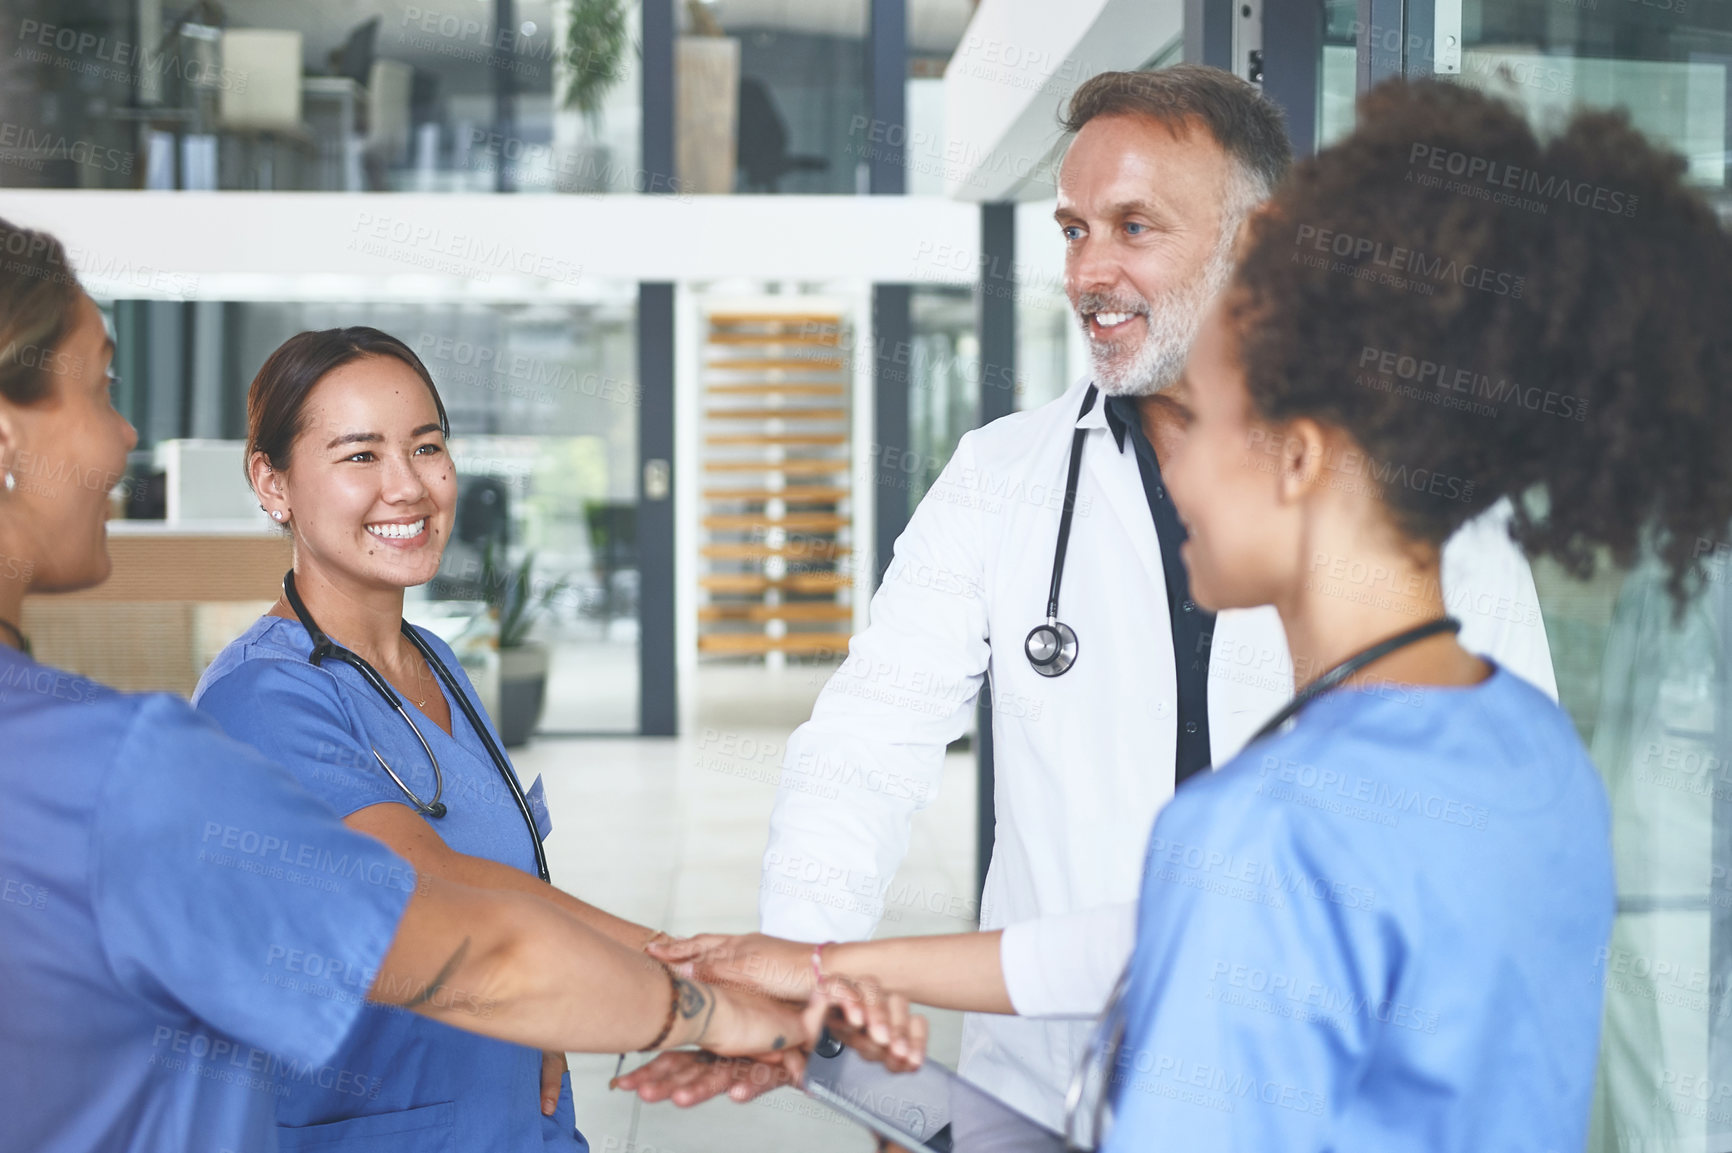 Buy stock photo Cropped shot of a diverse group of healthcare professionals standing huddled together with their hands piled in the middle